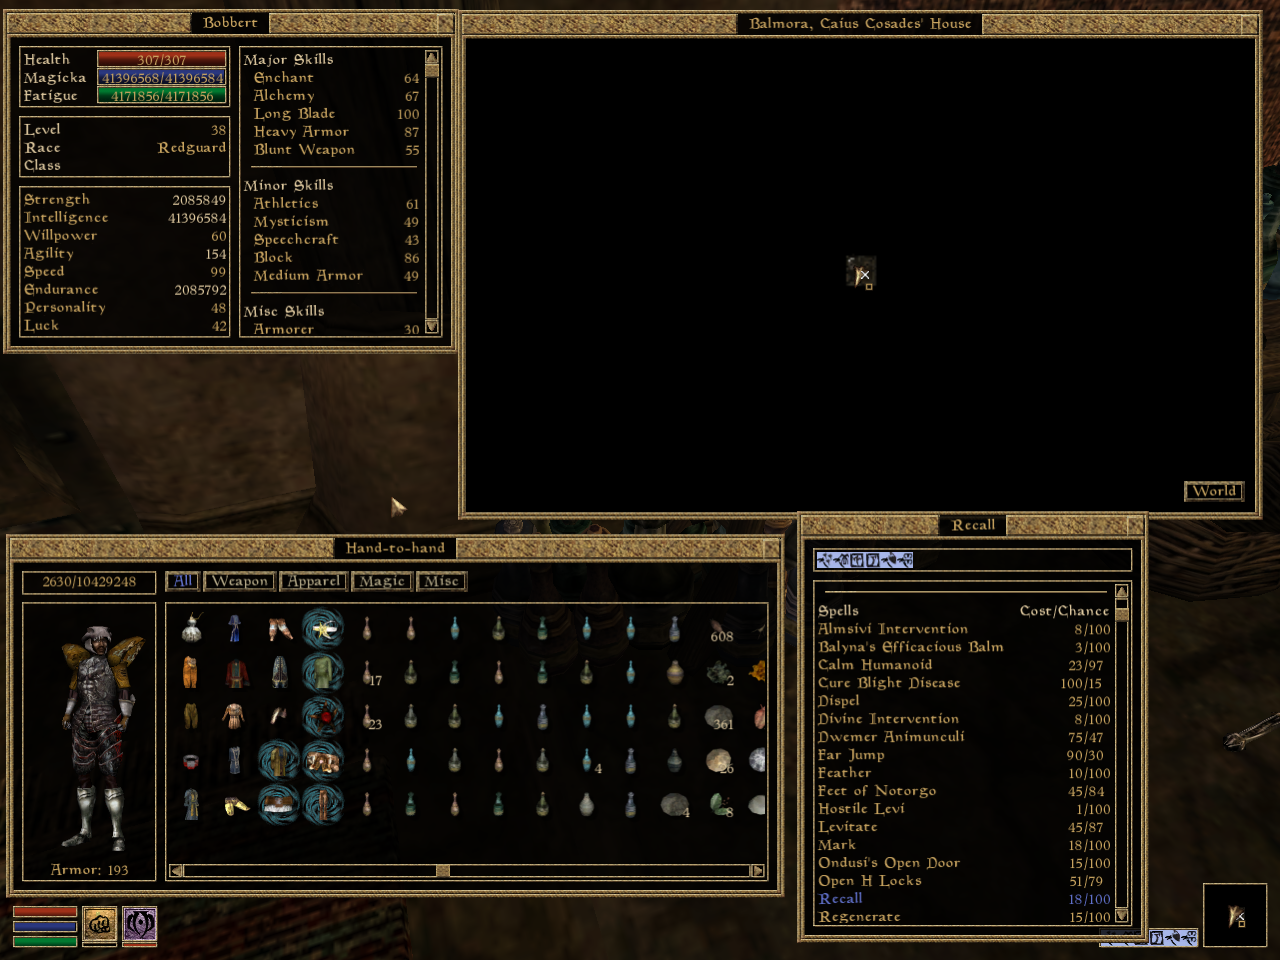 Morrowind Stats in the Millions